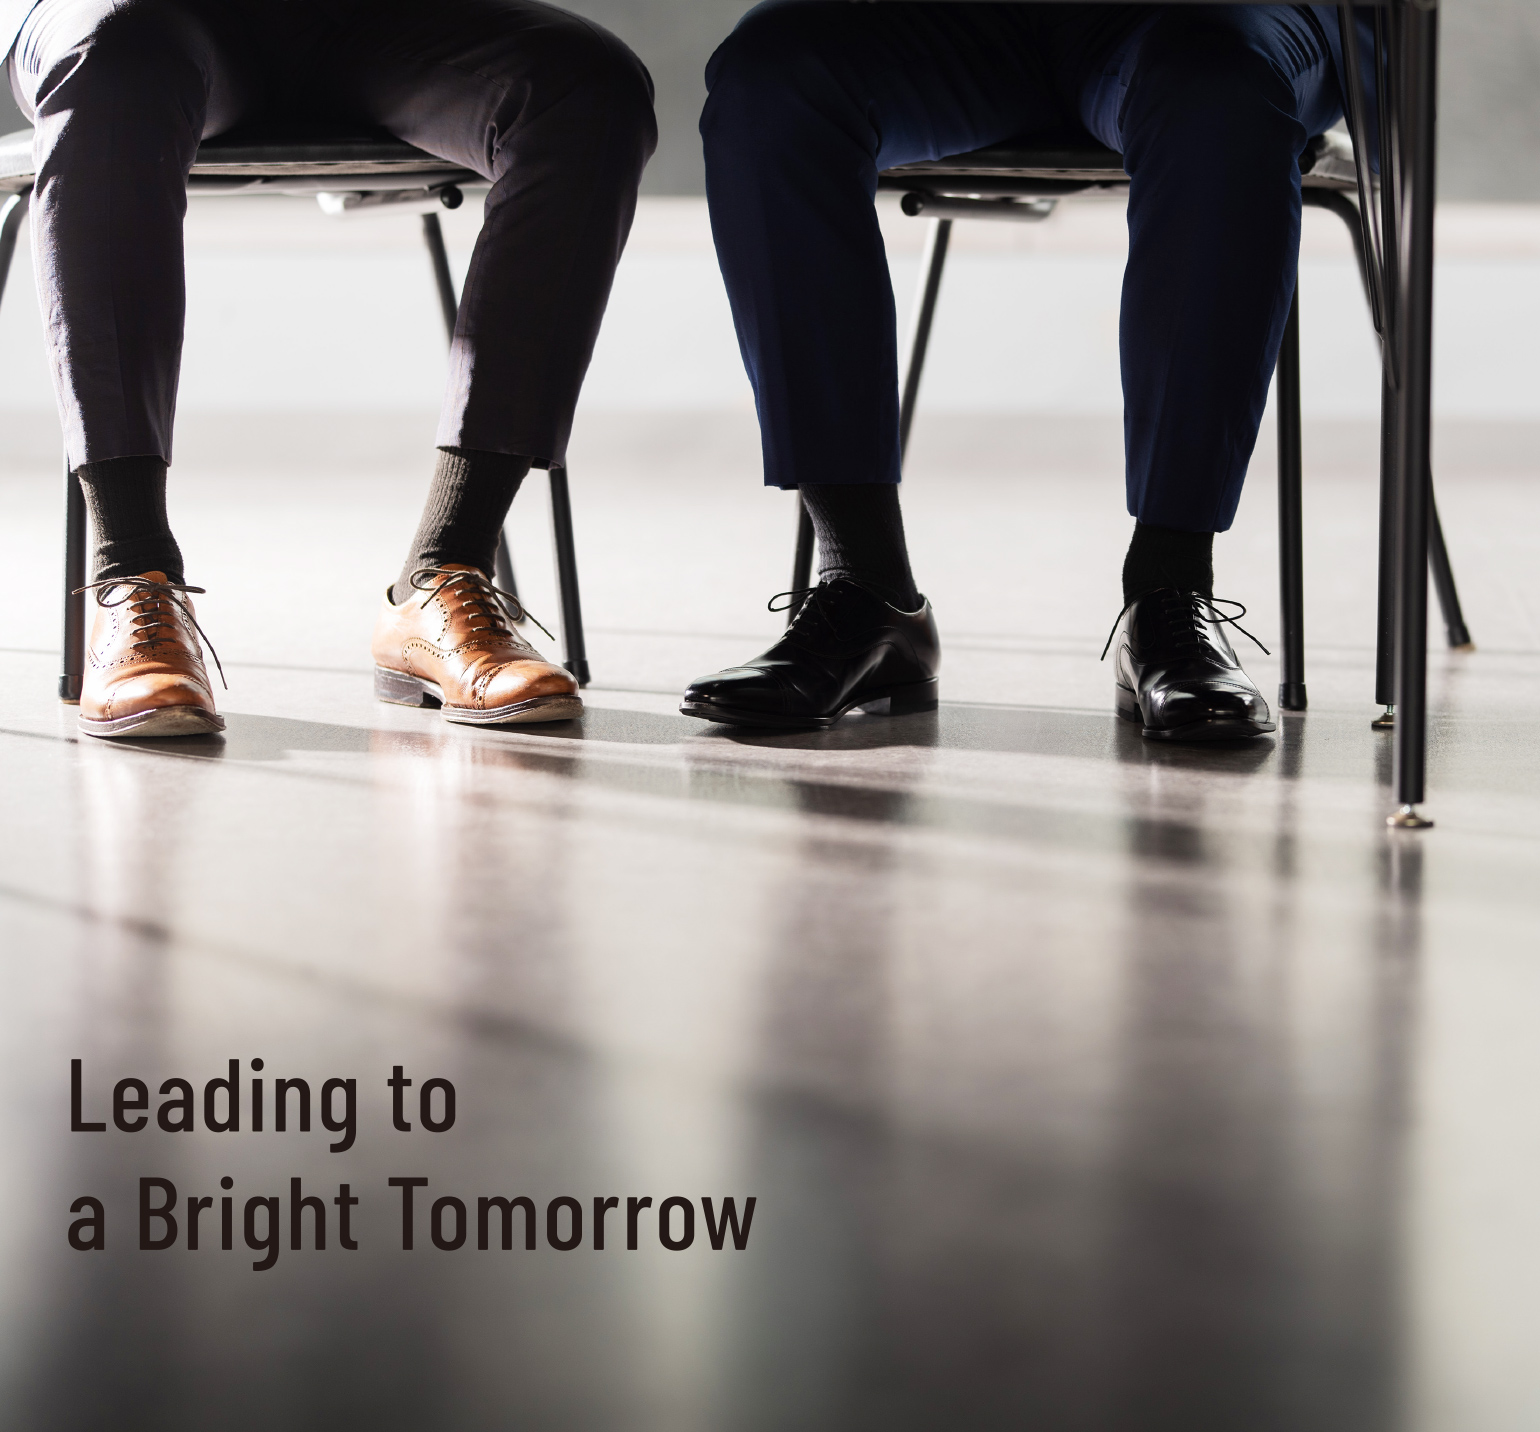 Leading to a Bright Tomorrow